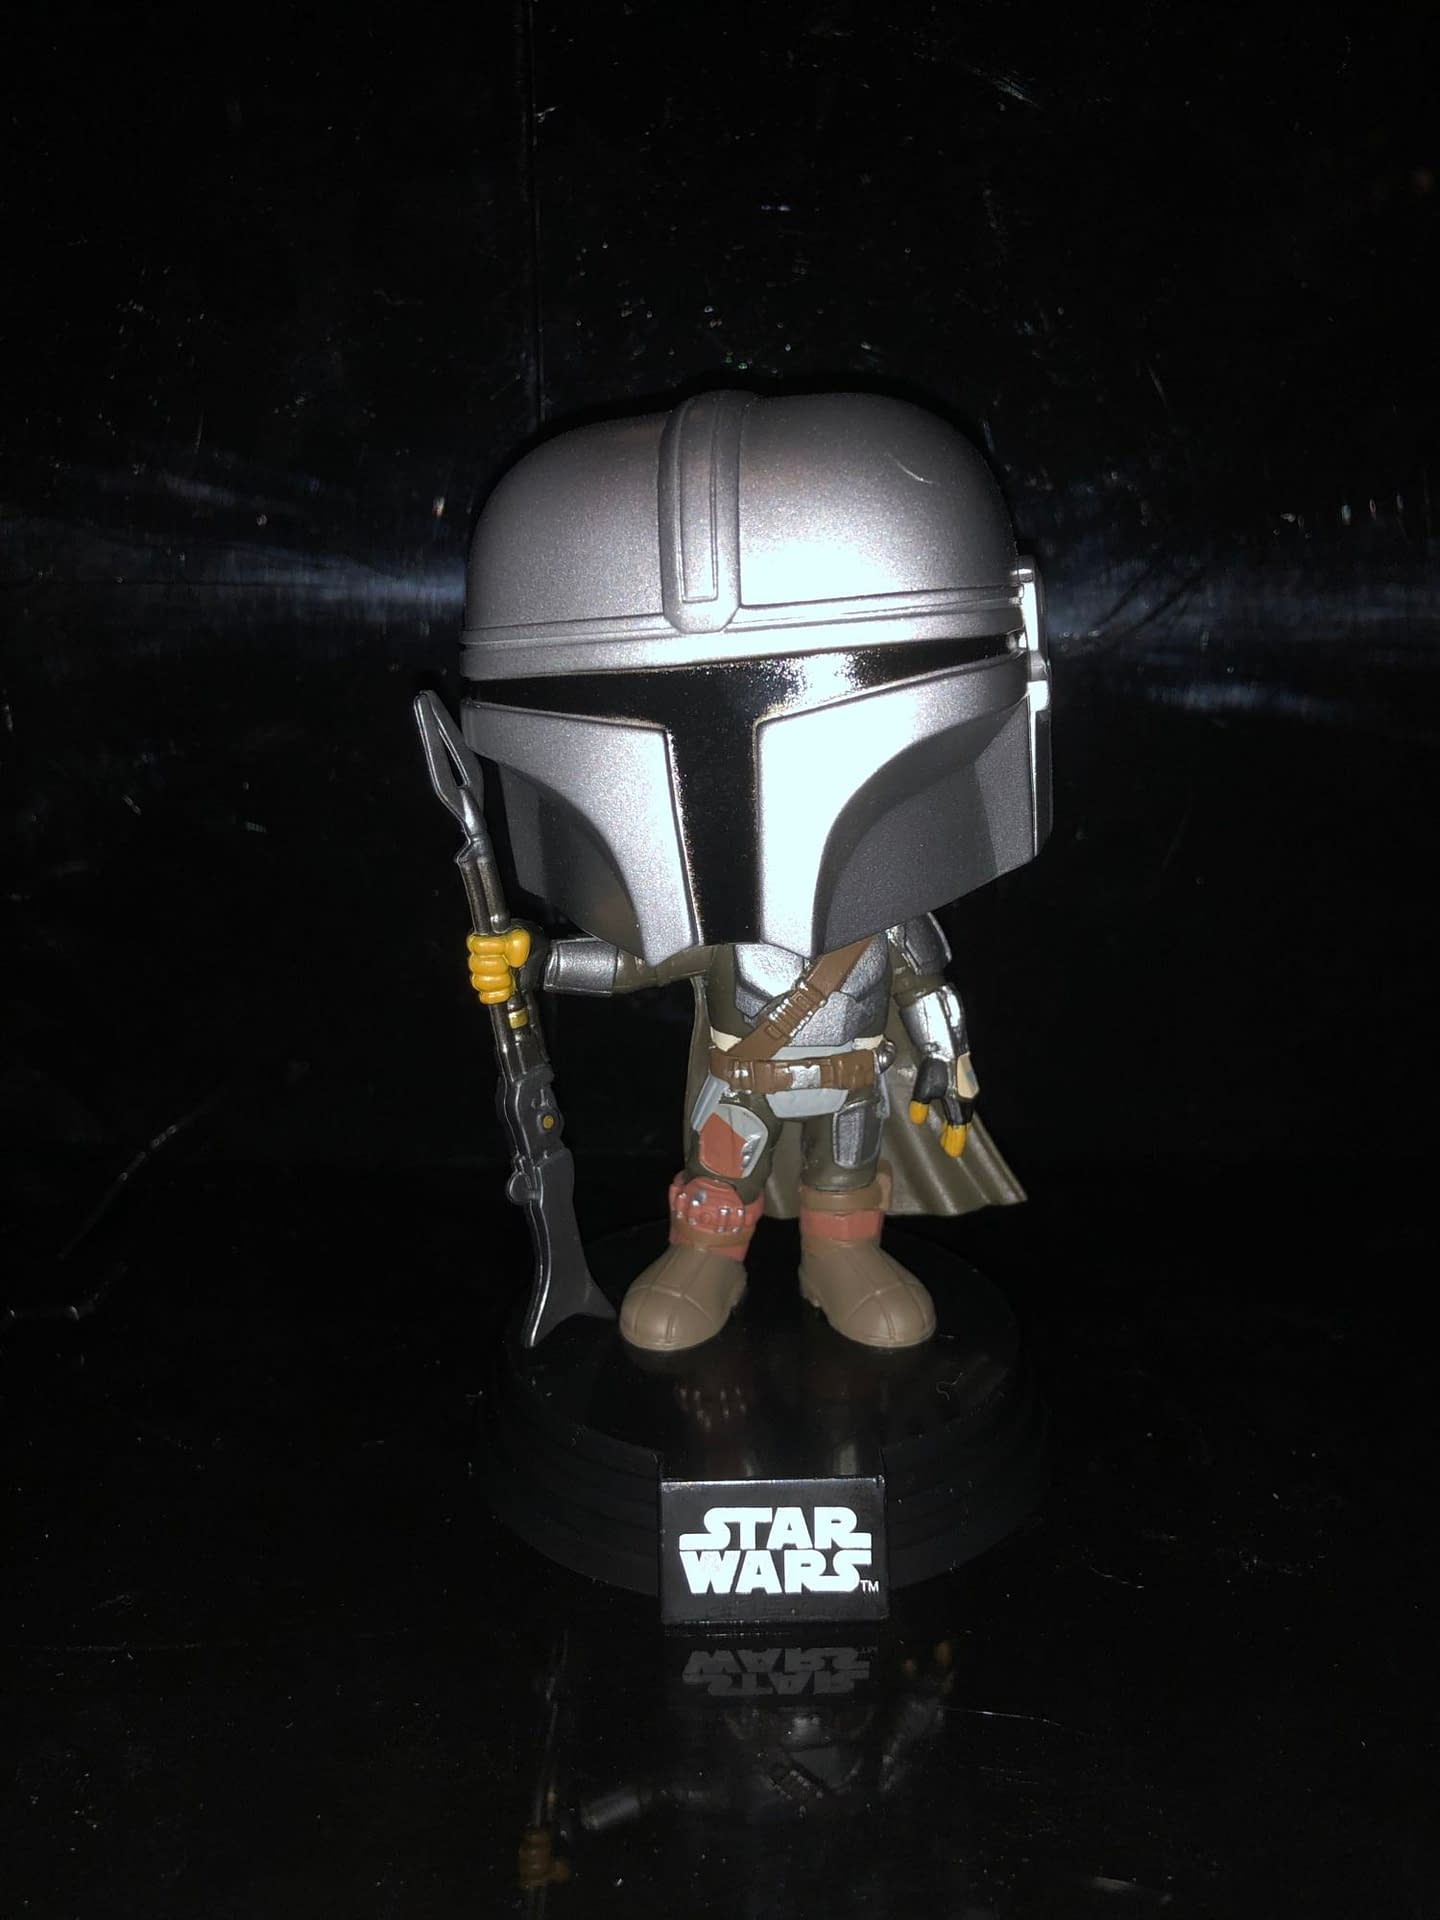 This is the Way to Our Mandalorian Funko Pop Review 